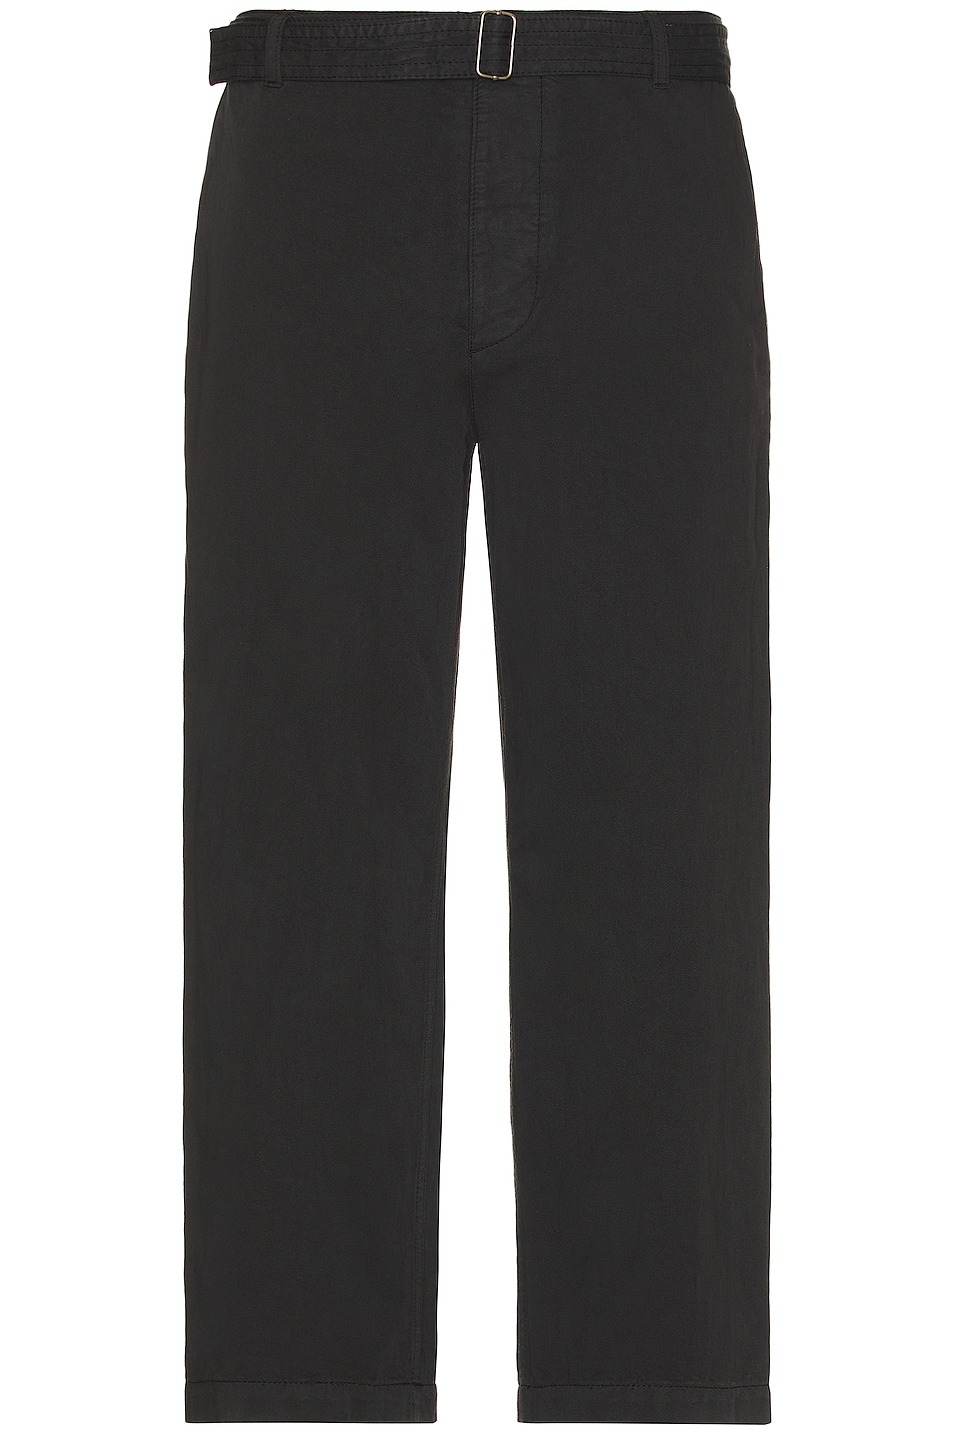 Image 1 of The Row East Pants in Black